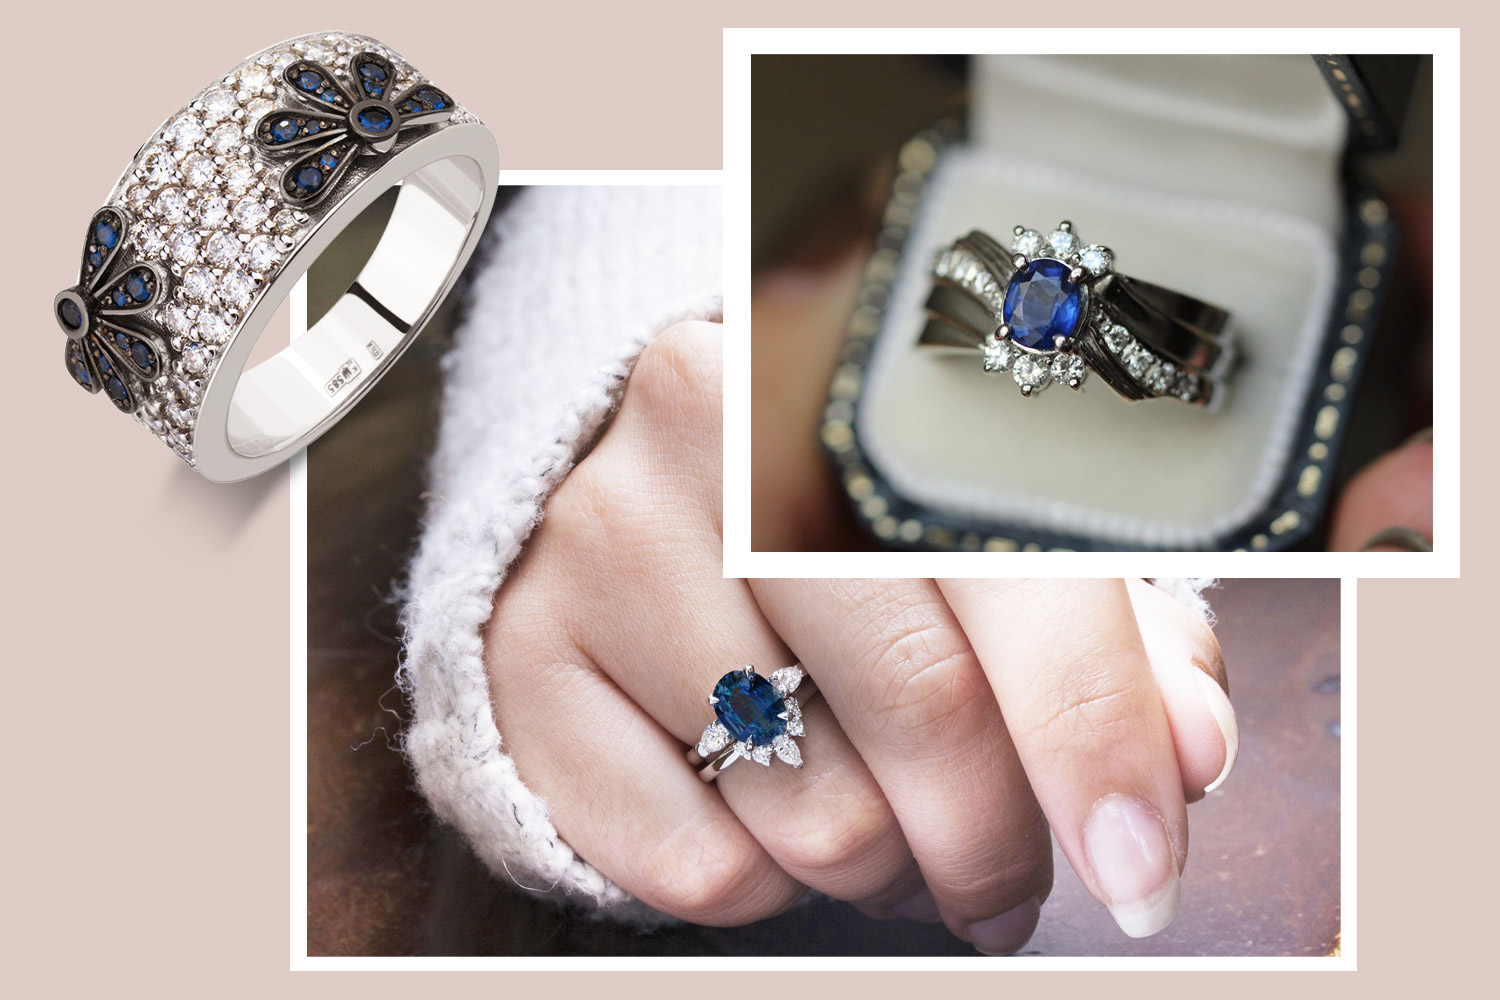 What it should be - a sapphire engagement ring?